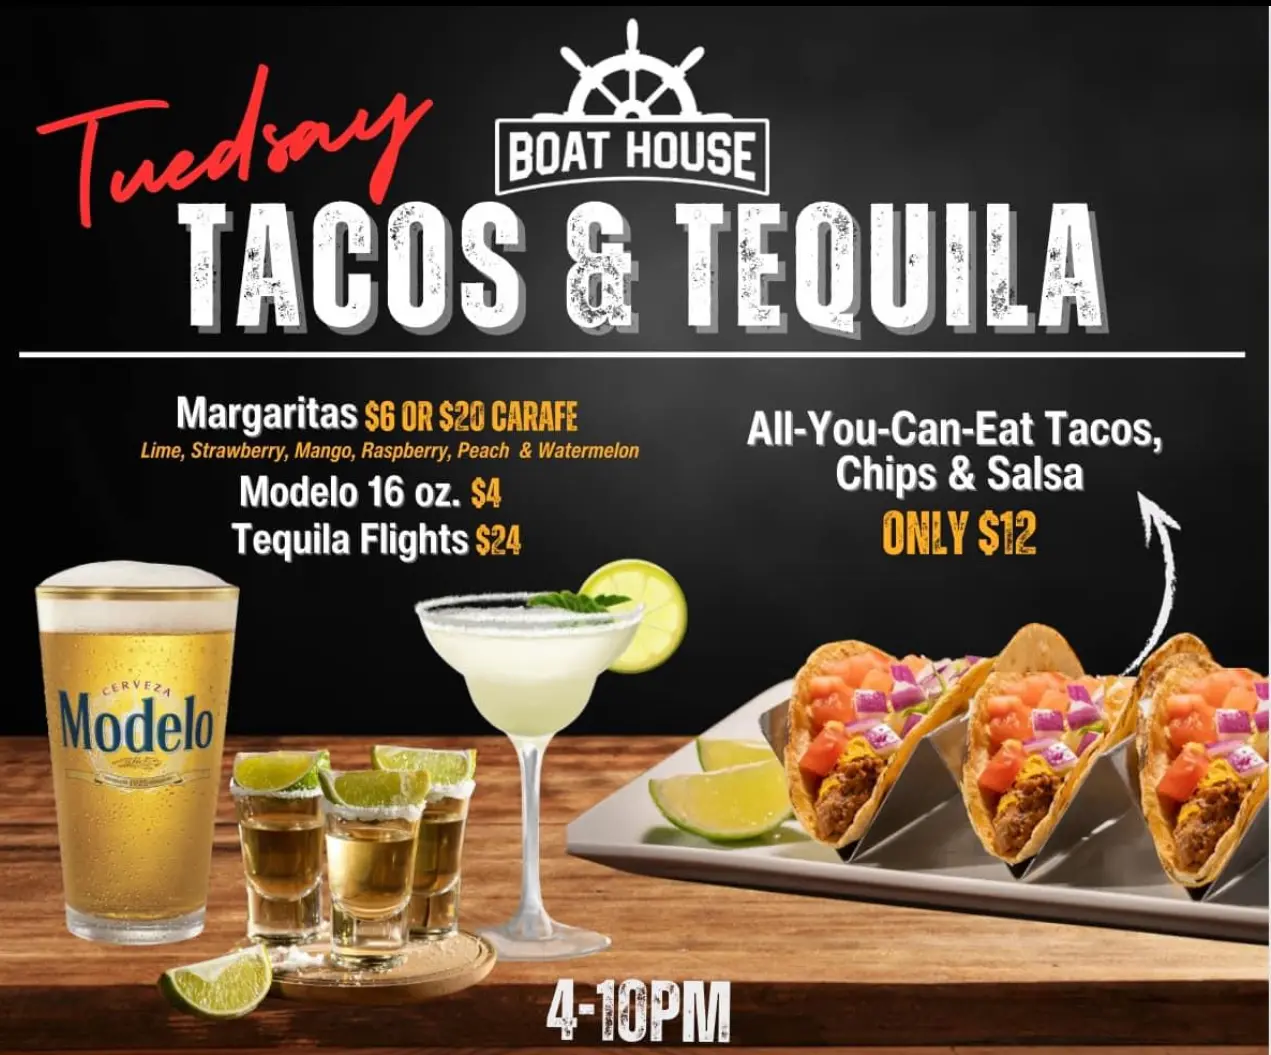 The boat house tacos and tequila specials, every Tuesdays from 4 to 10.